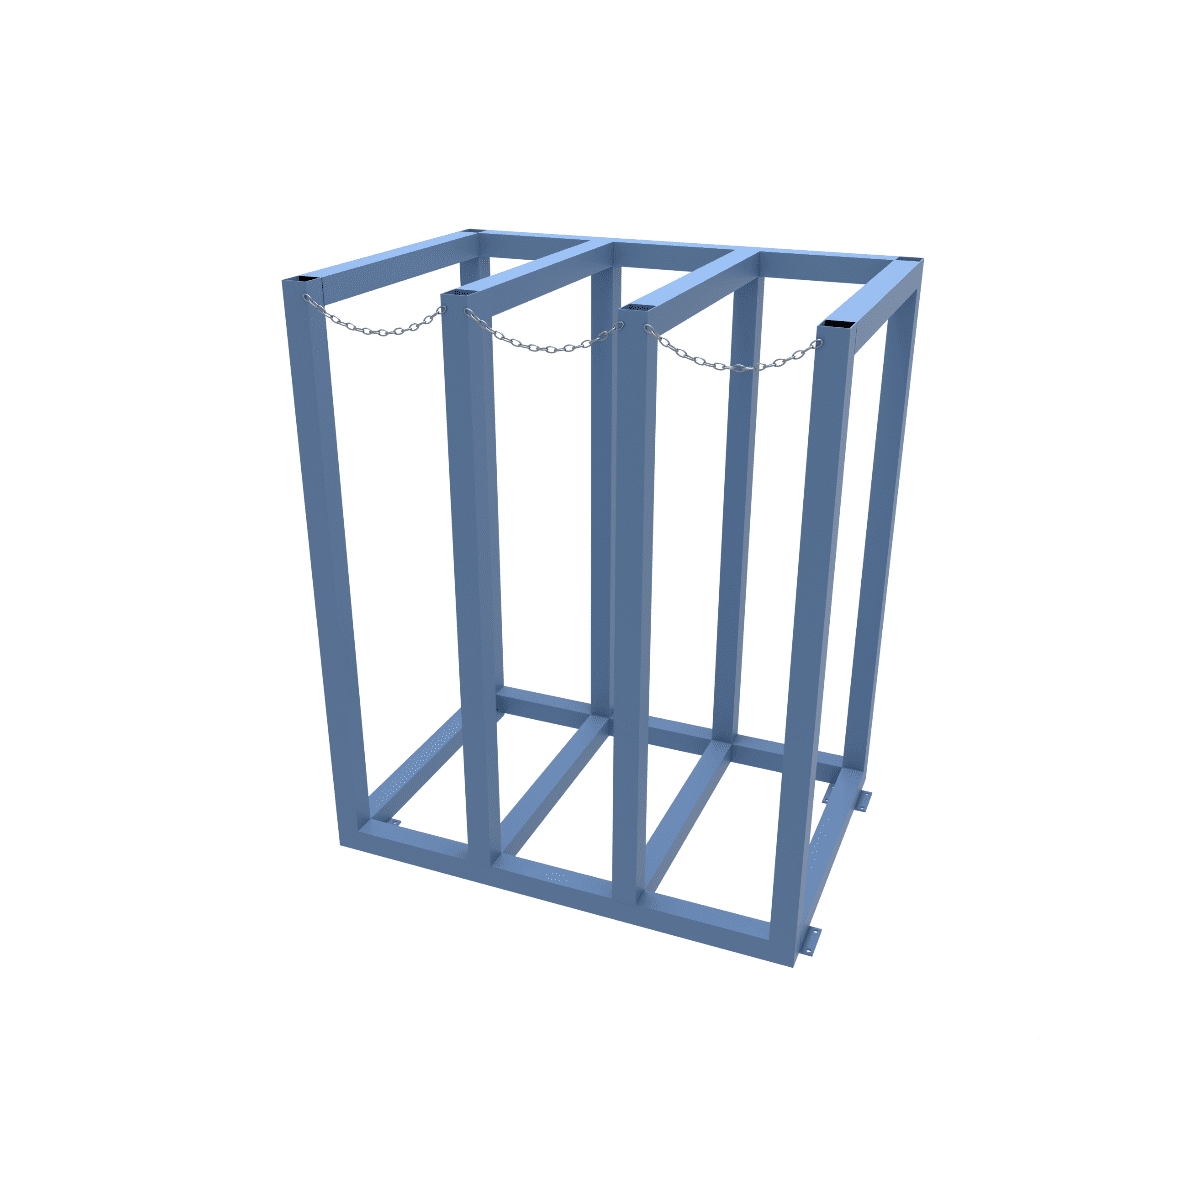 Larger Heavy Duty Vertical Storage Racking with ground fixings for stability